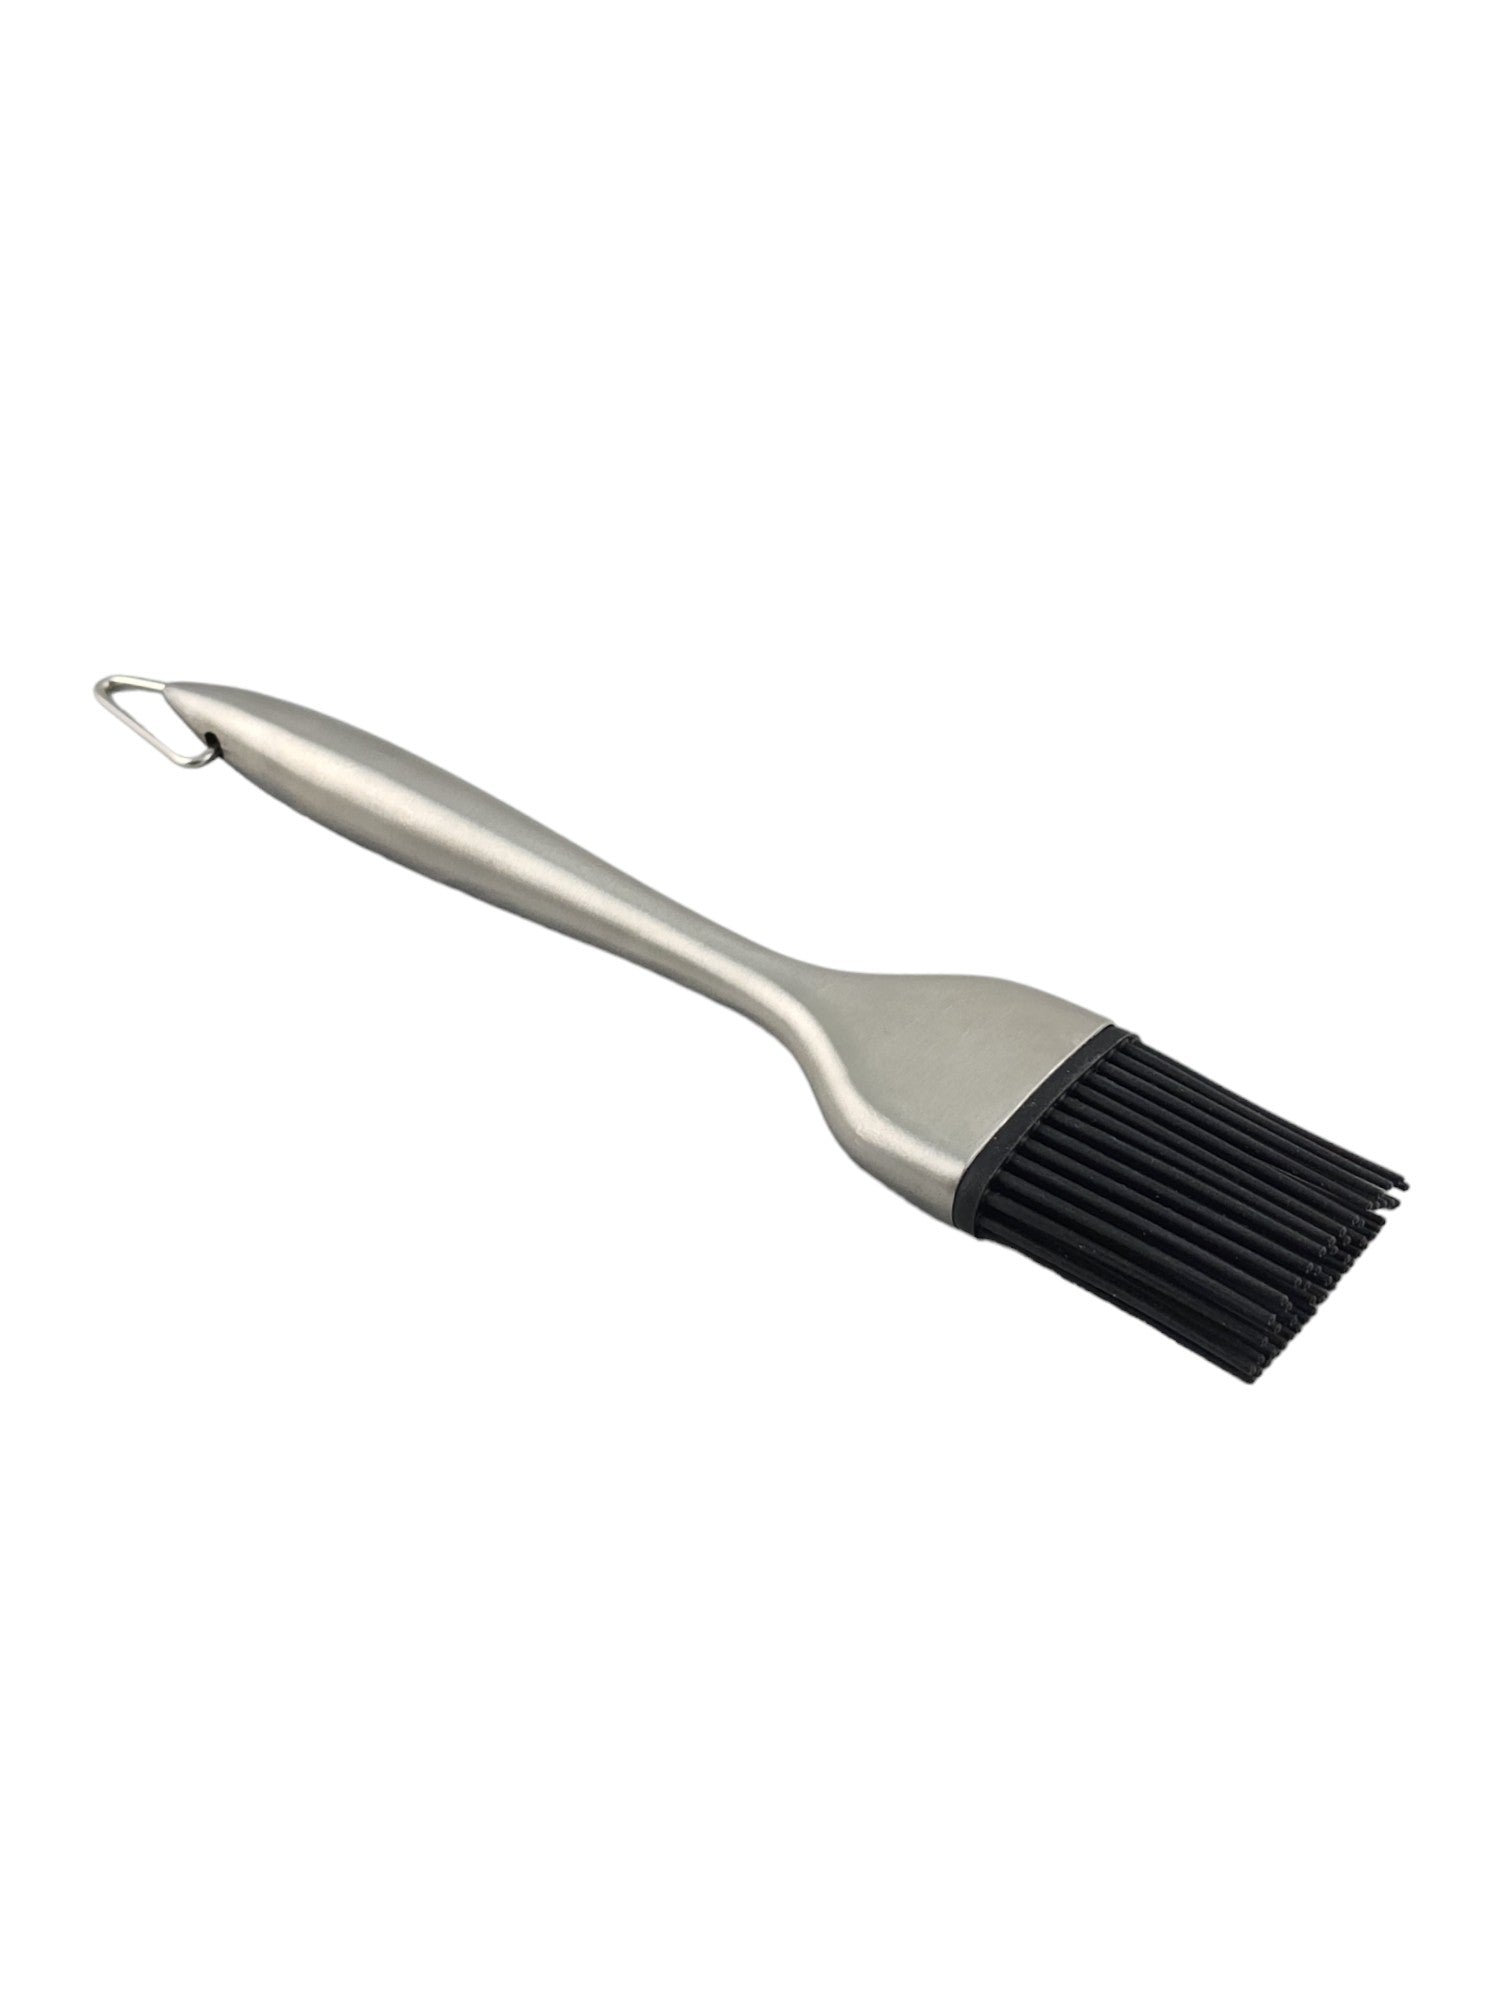 Stainless Steel Silicone Basting Brush: Precision Coating Tool